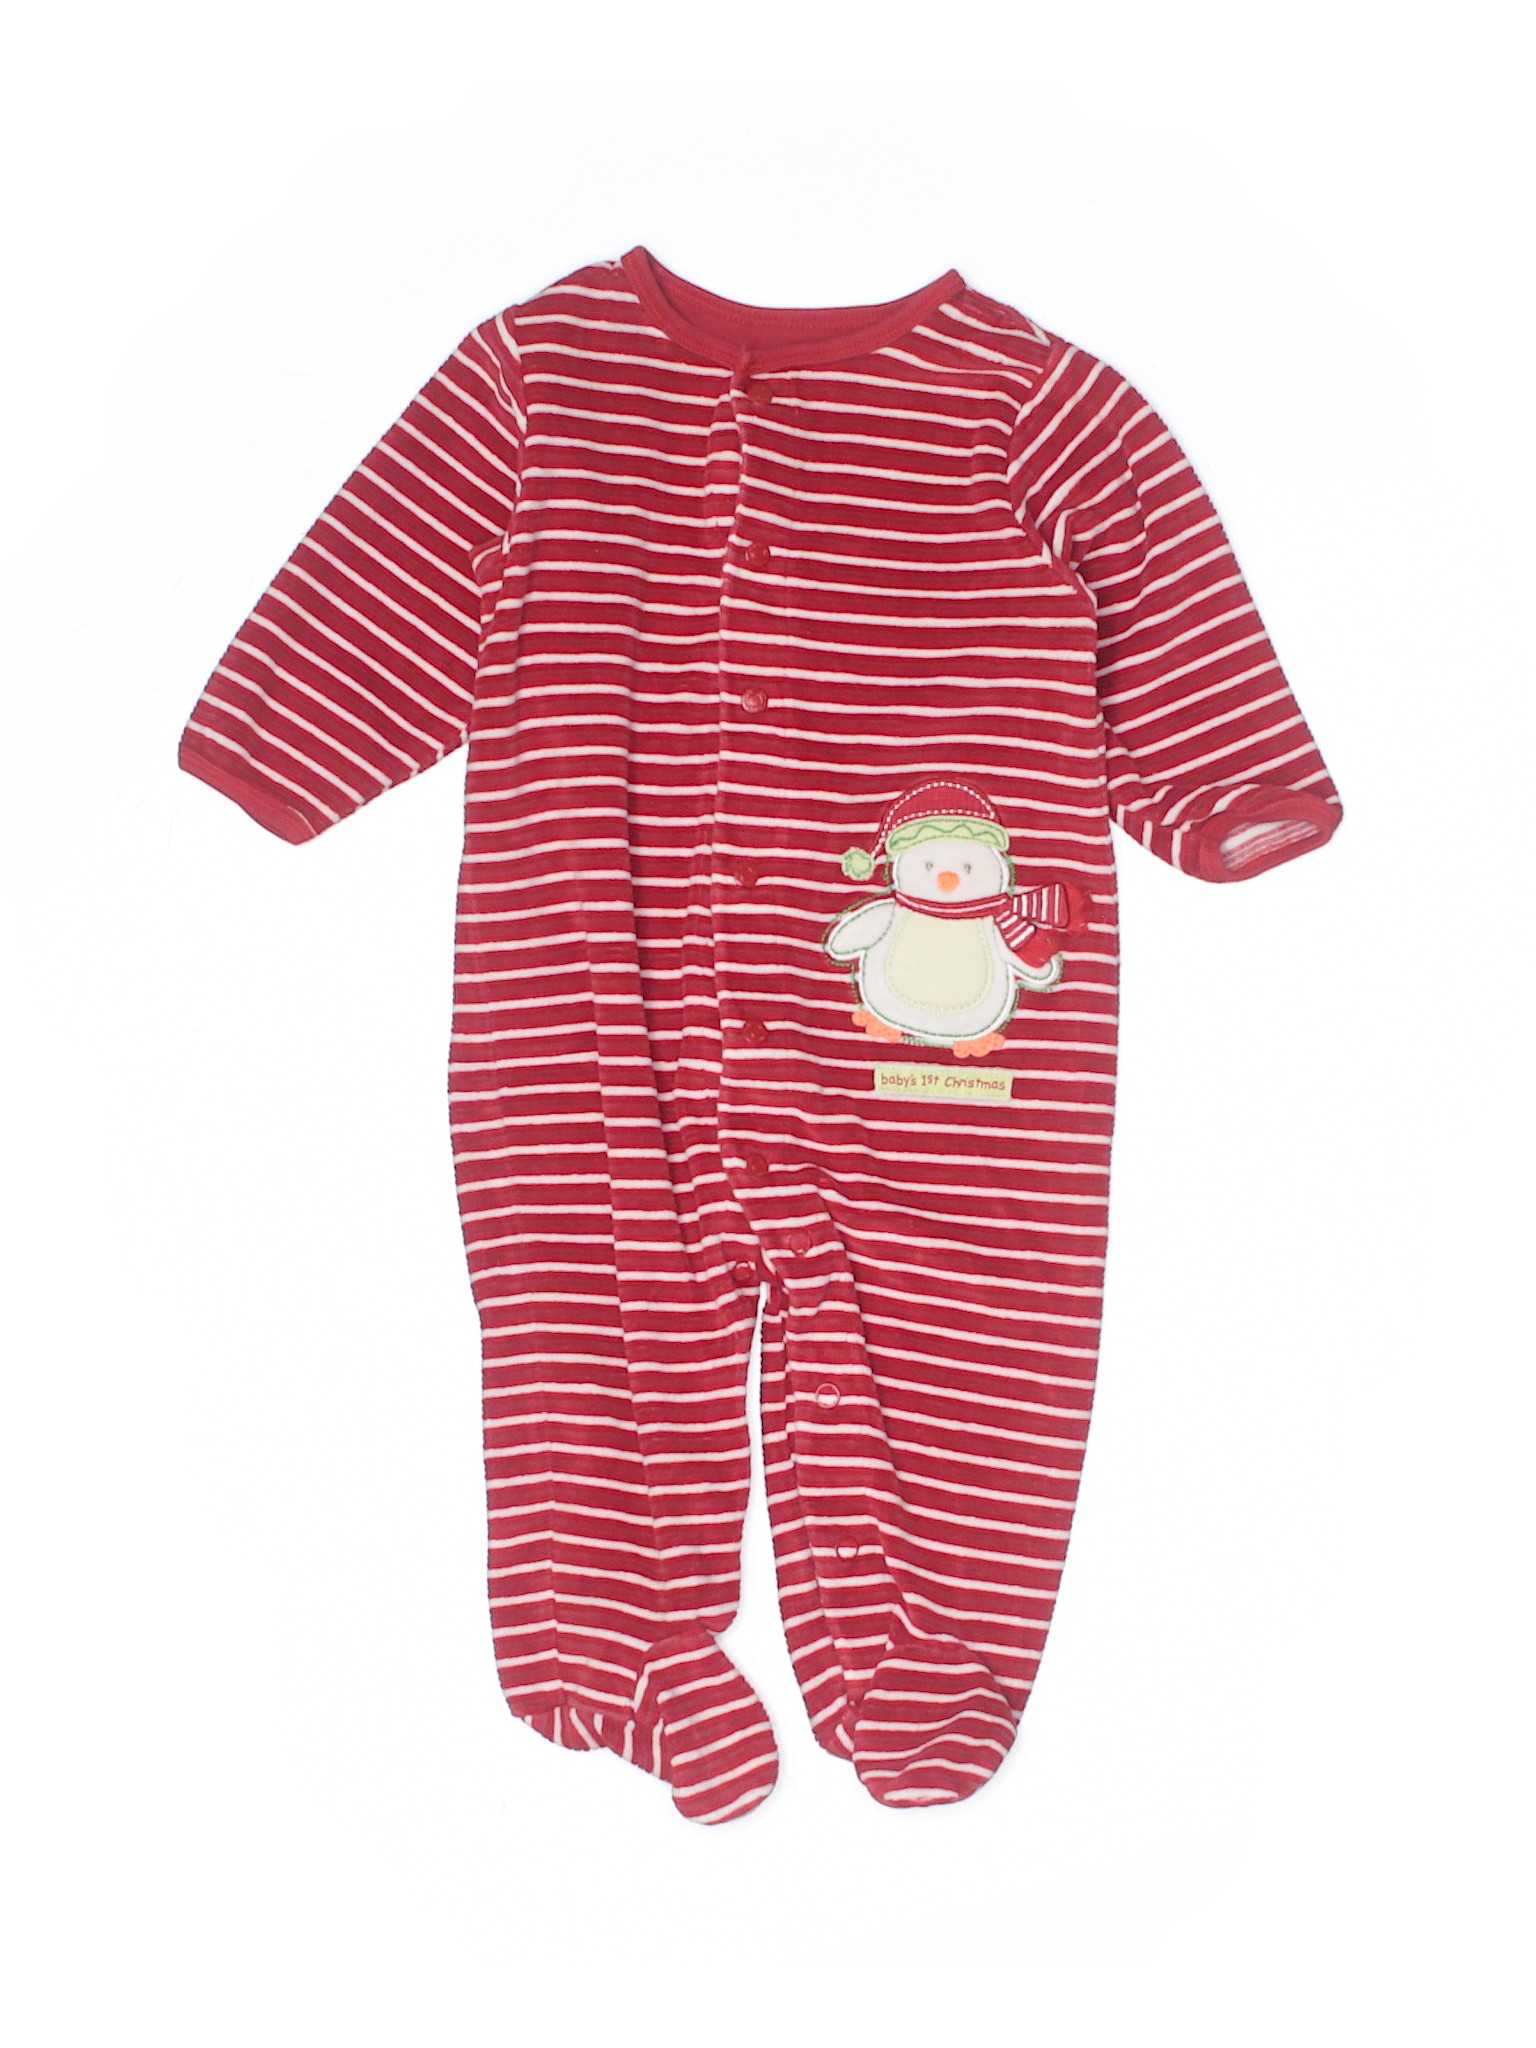 Carter's Boys Red Long Sleeve Outfit 9 Months | eBay